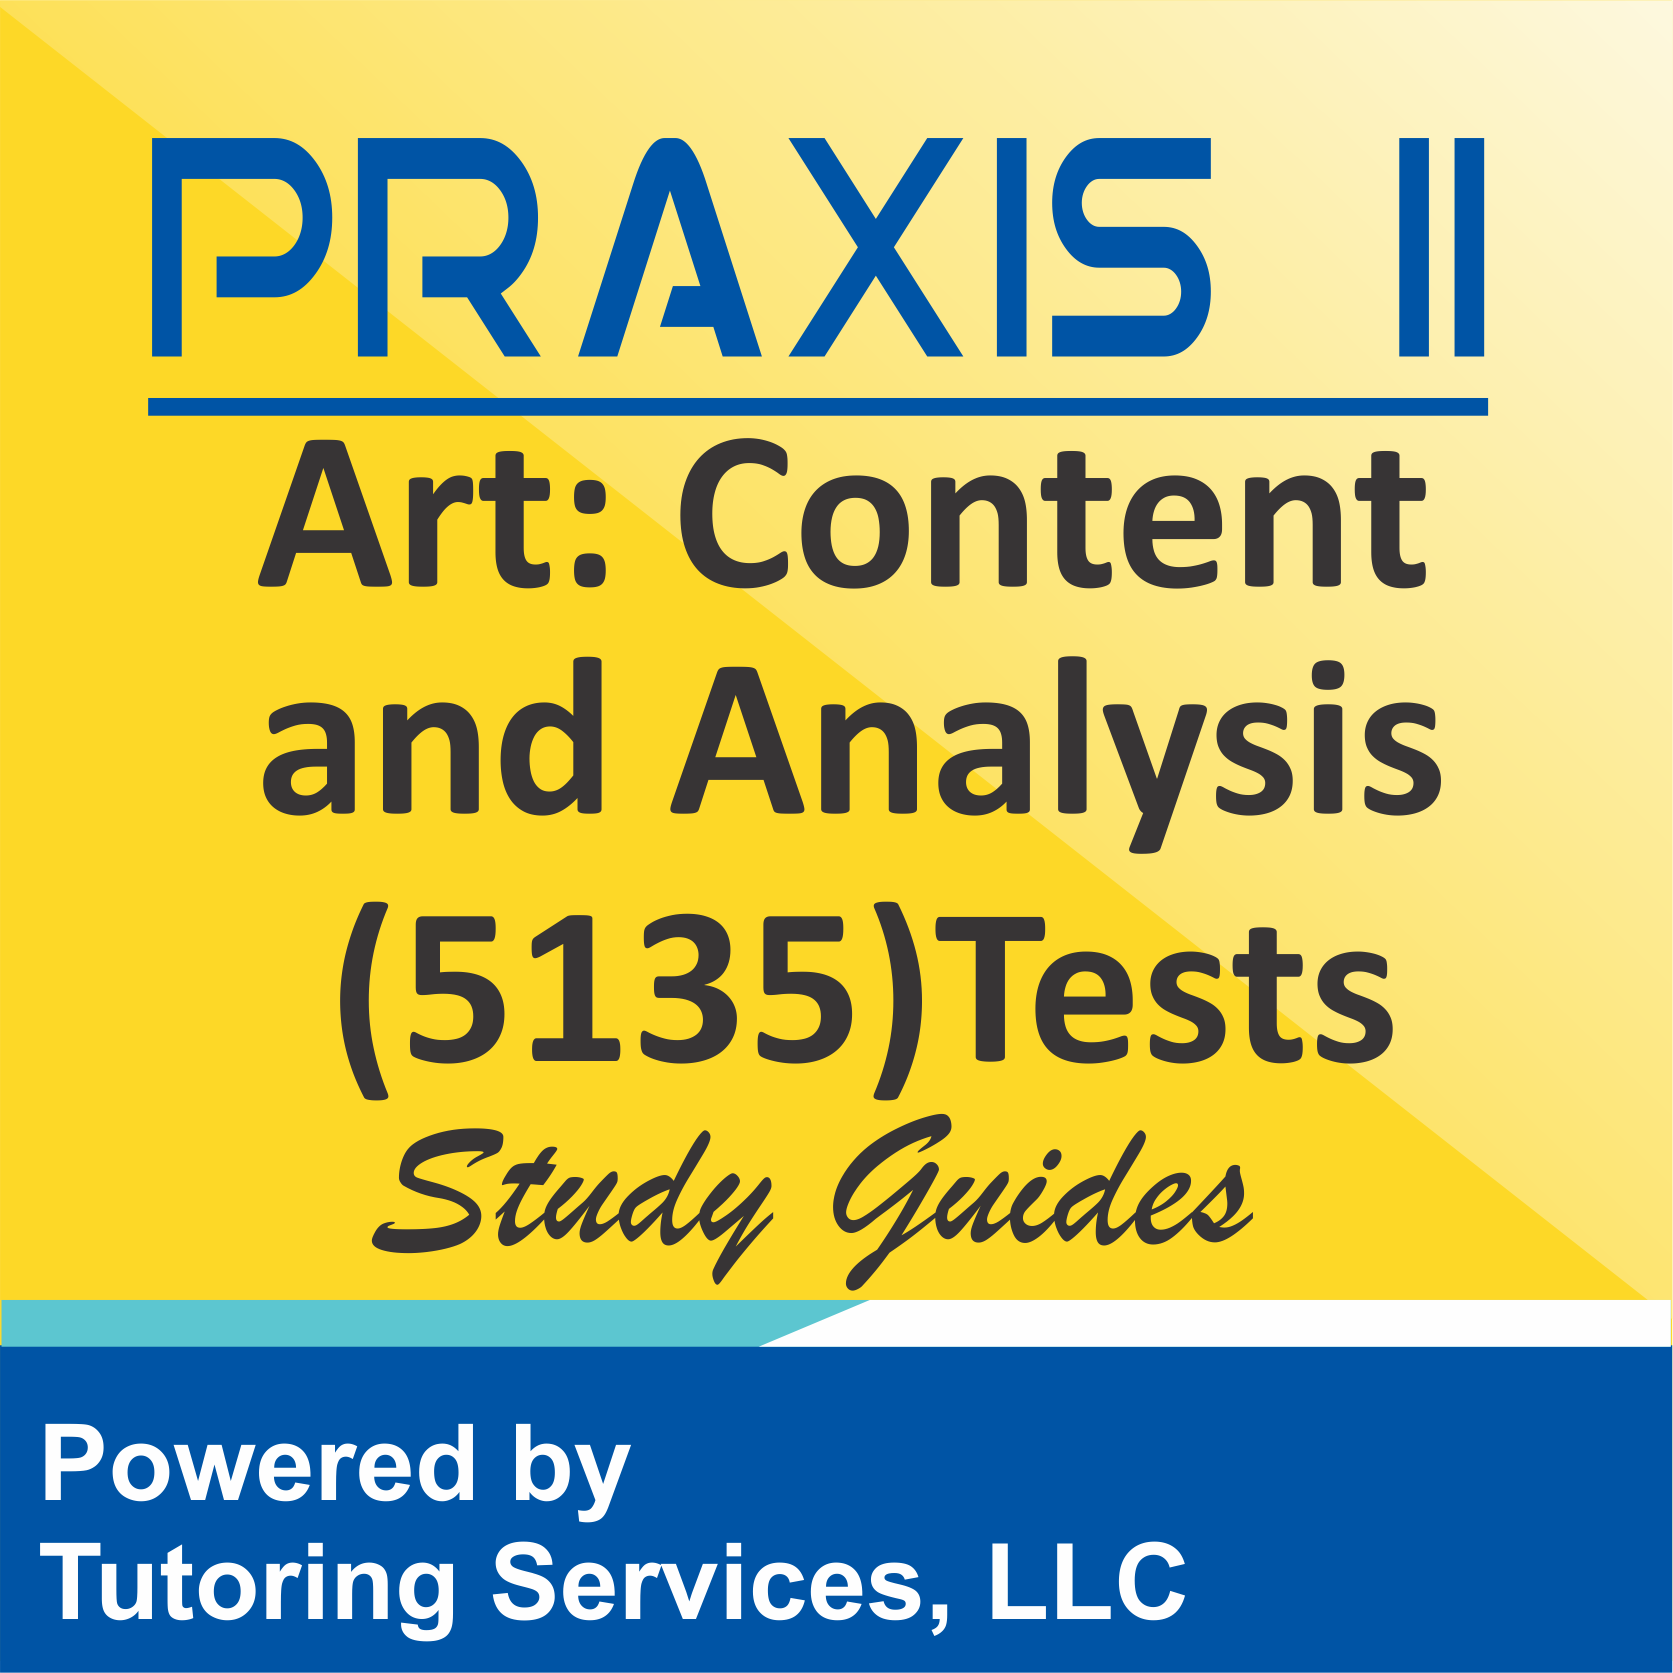 Praxis II Art: Content and Analysis (5135) Examination Information